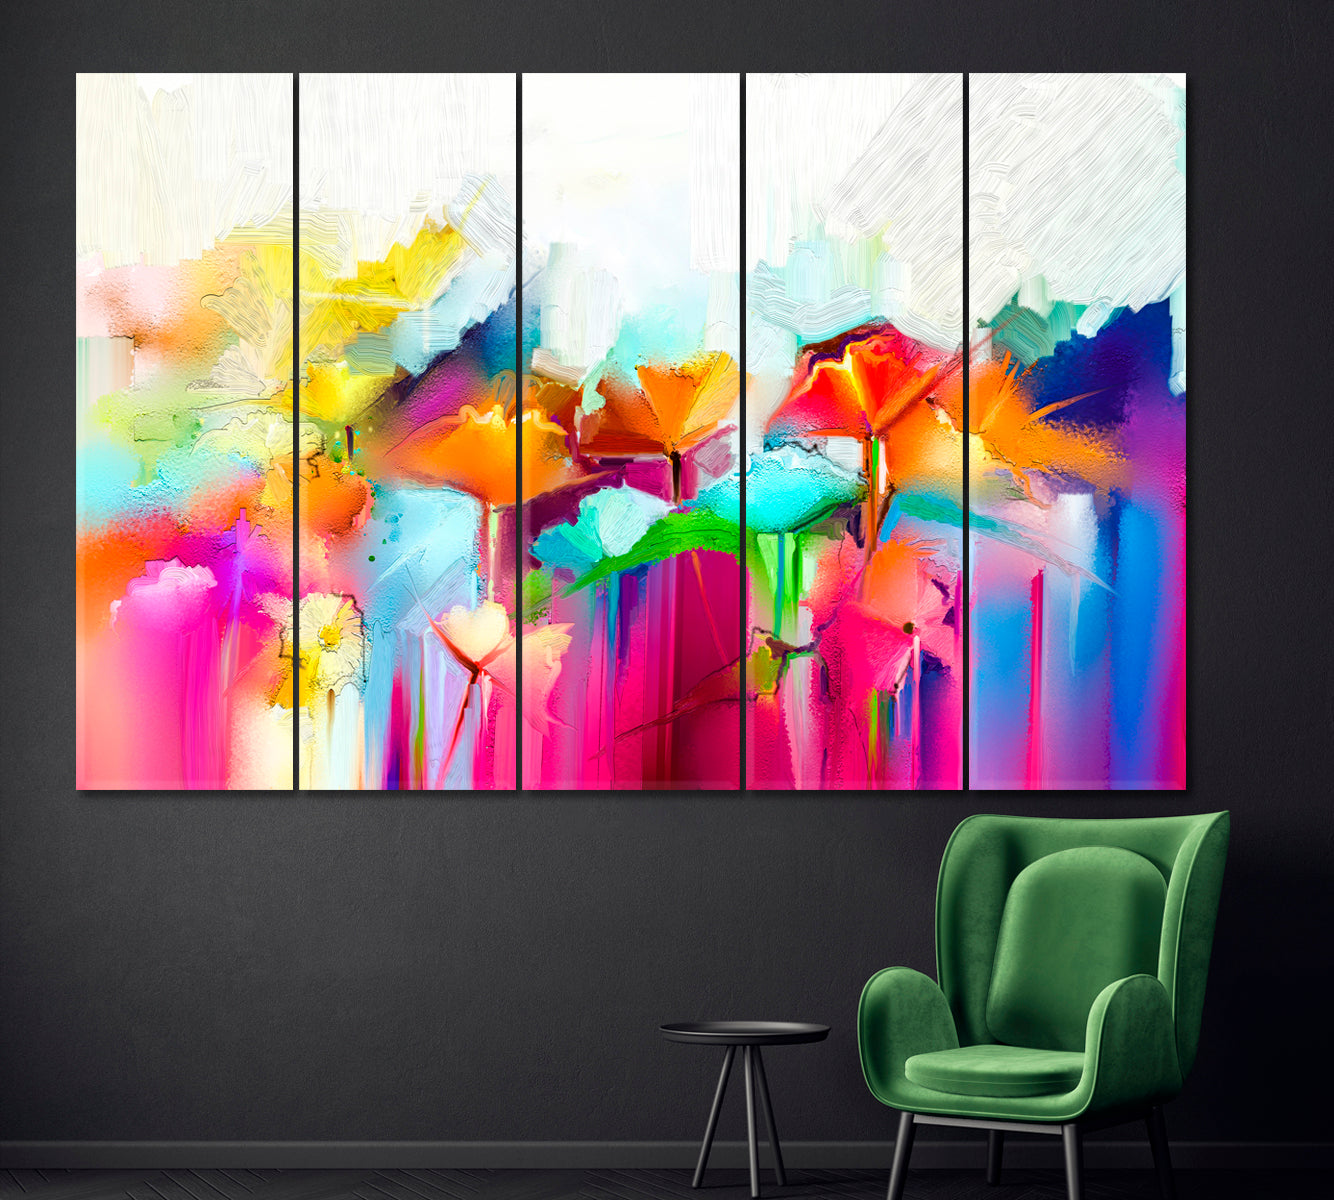 Abstract Flowers Vivid Modern Impressionist Contemporary Art Artesty 5 panels 36" x 24" 